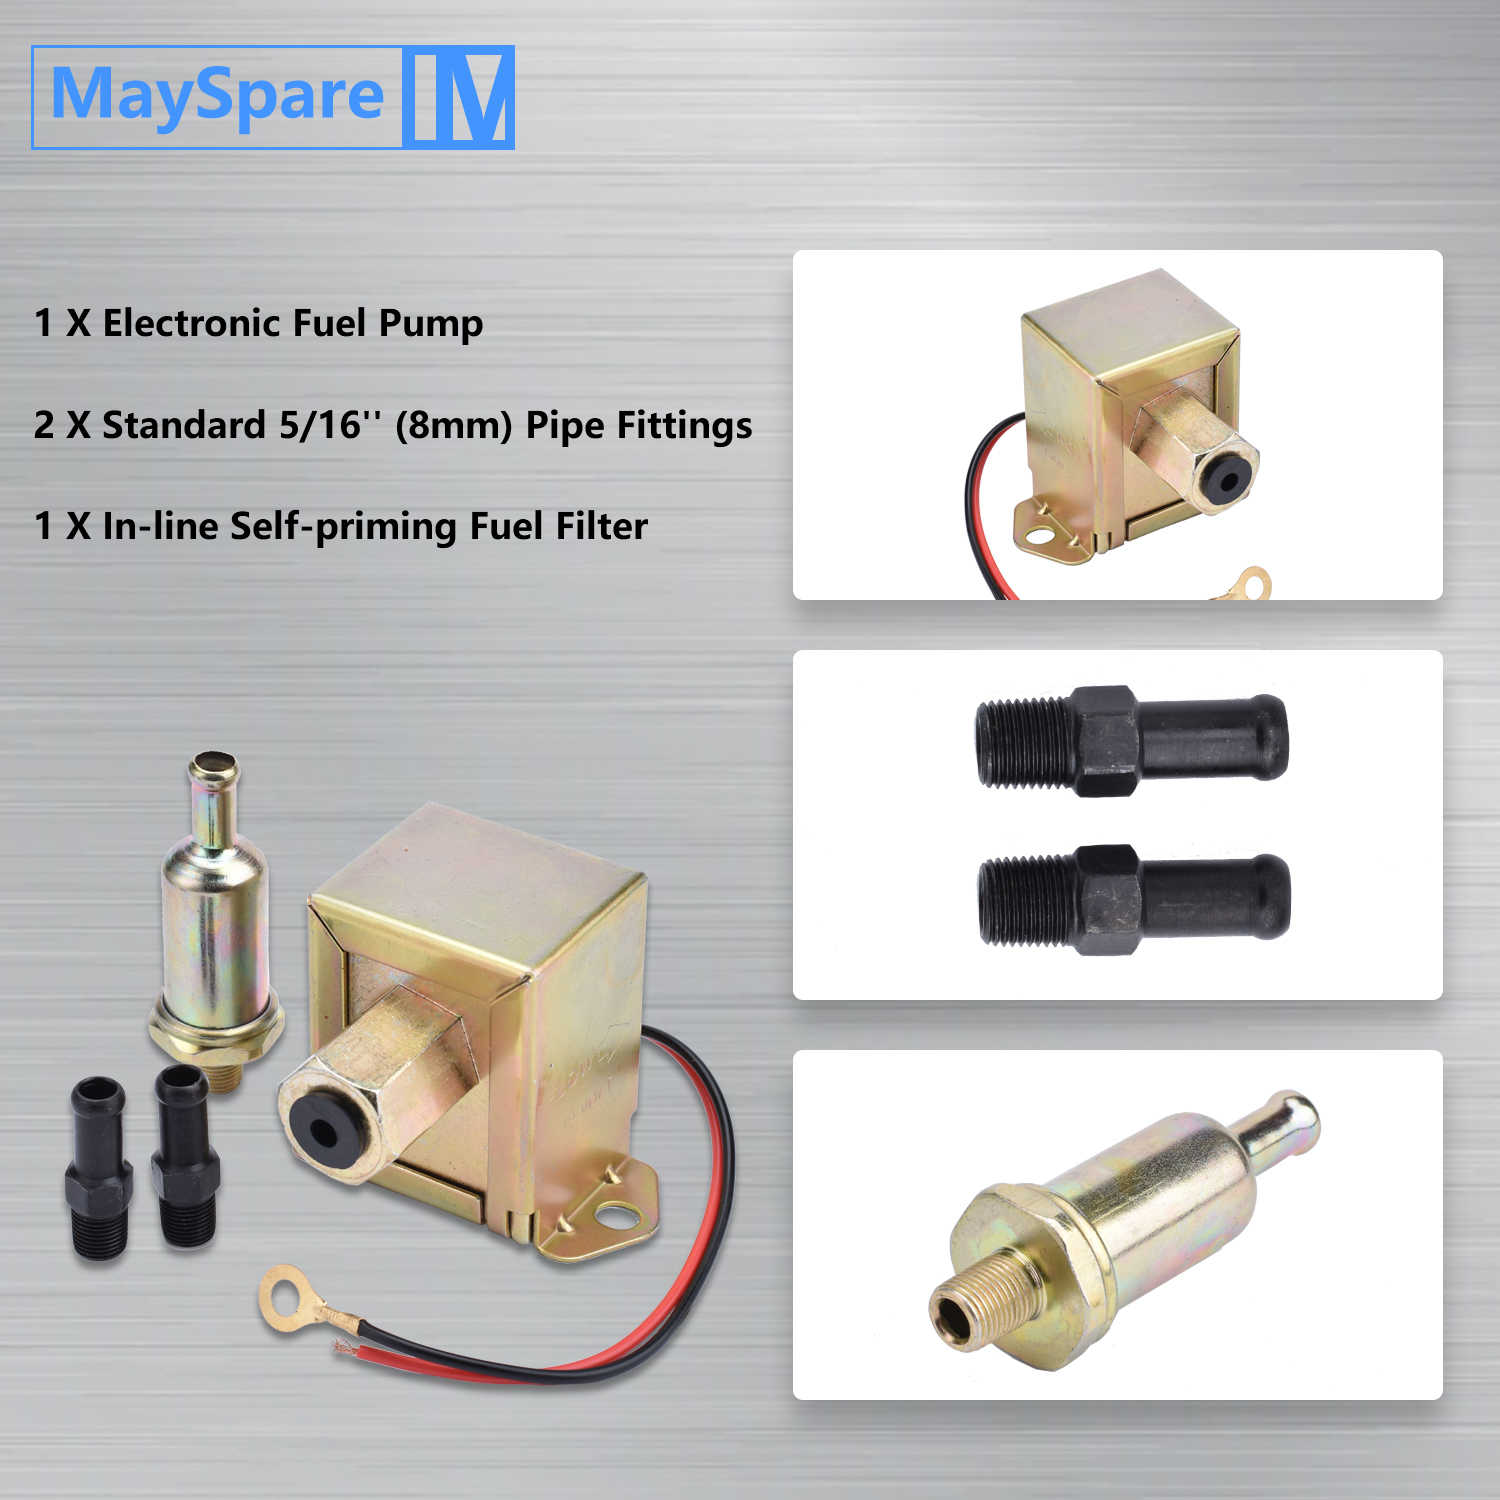 Electric Fuel Pump is basic component of electric jet fuel injection system